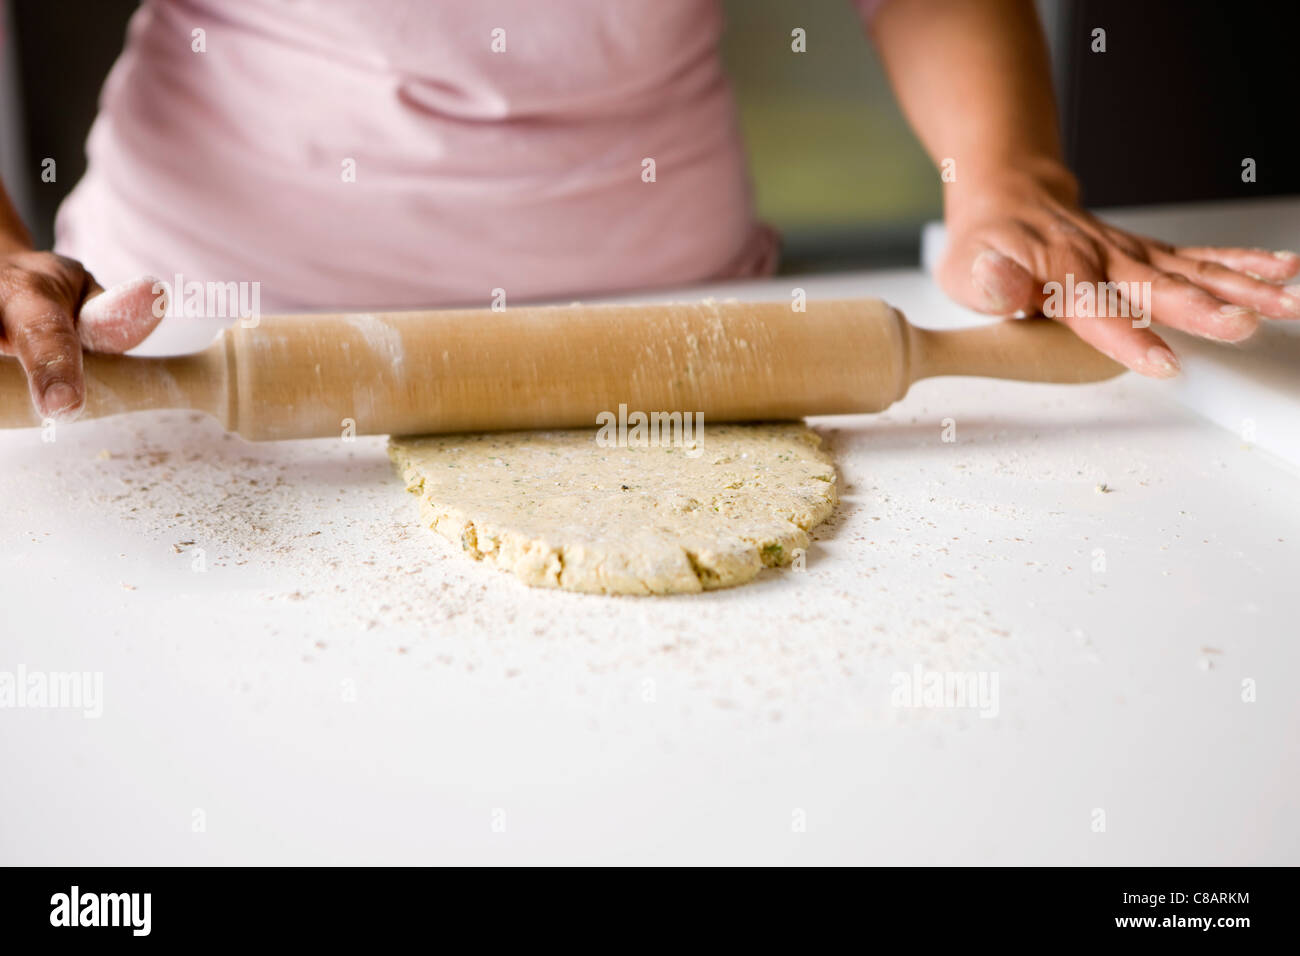 Flattening the soya bean mixture with a rolling pin Stock Photo